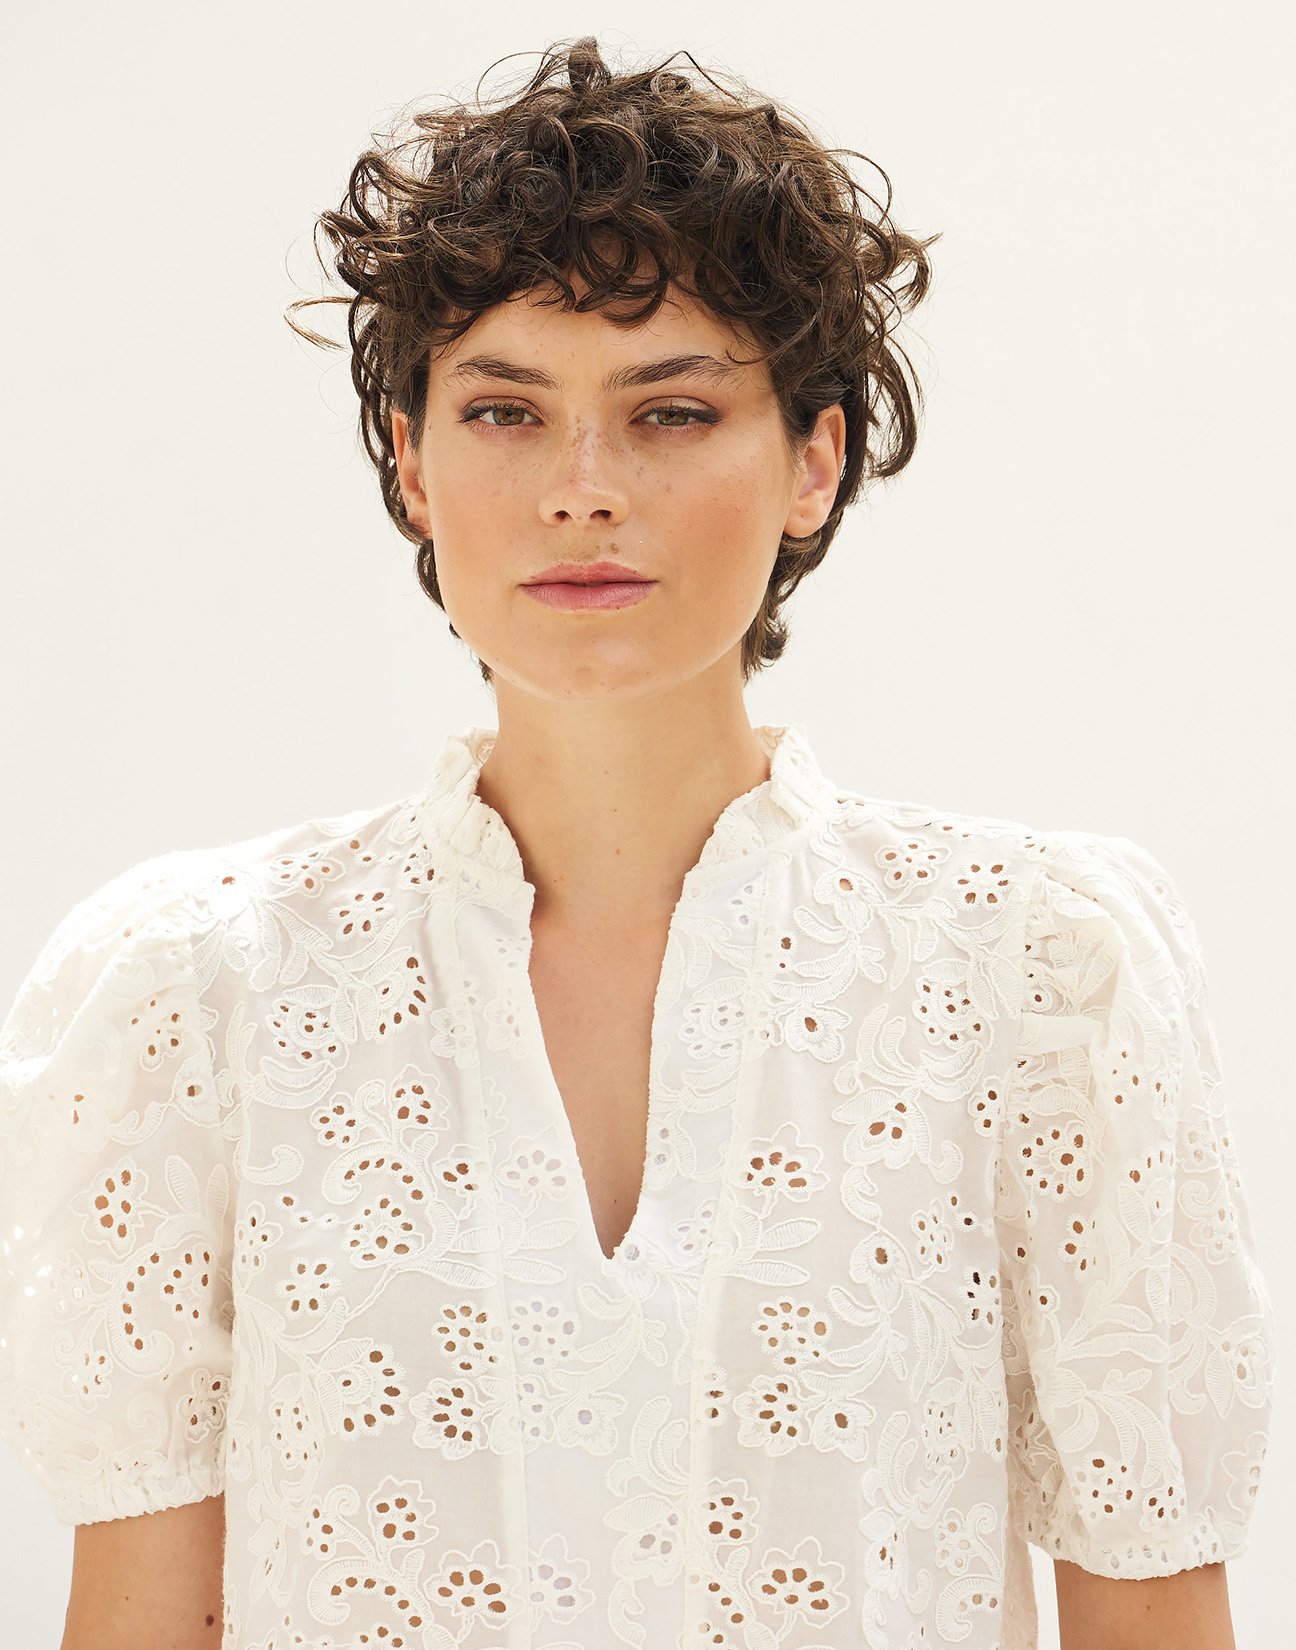 Embroidery blouse